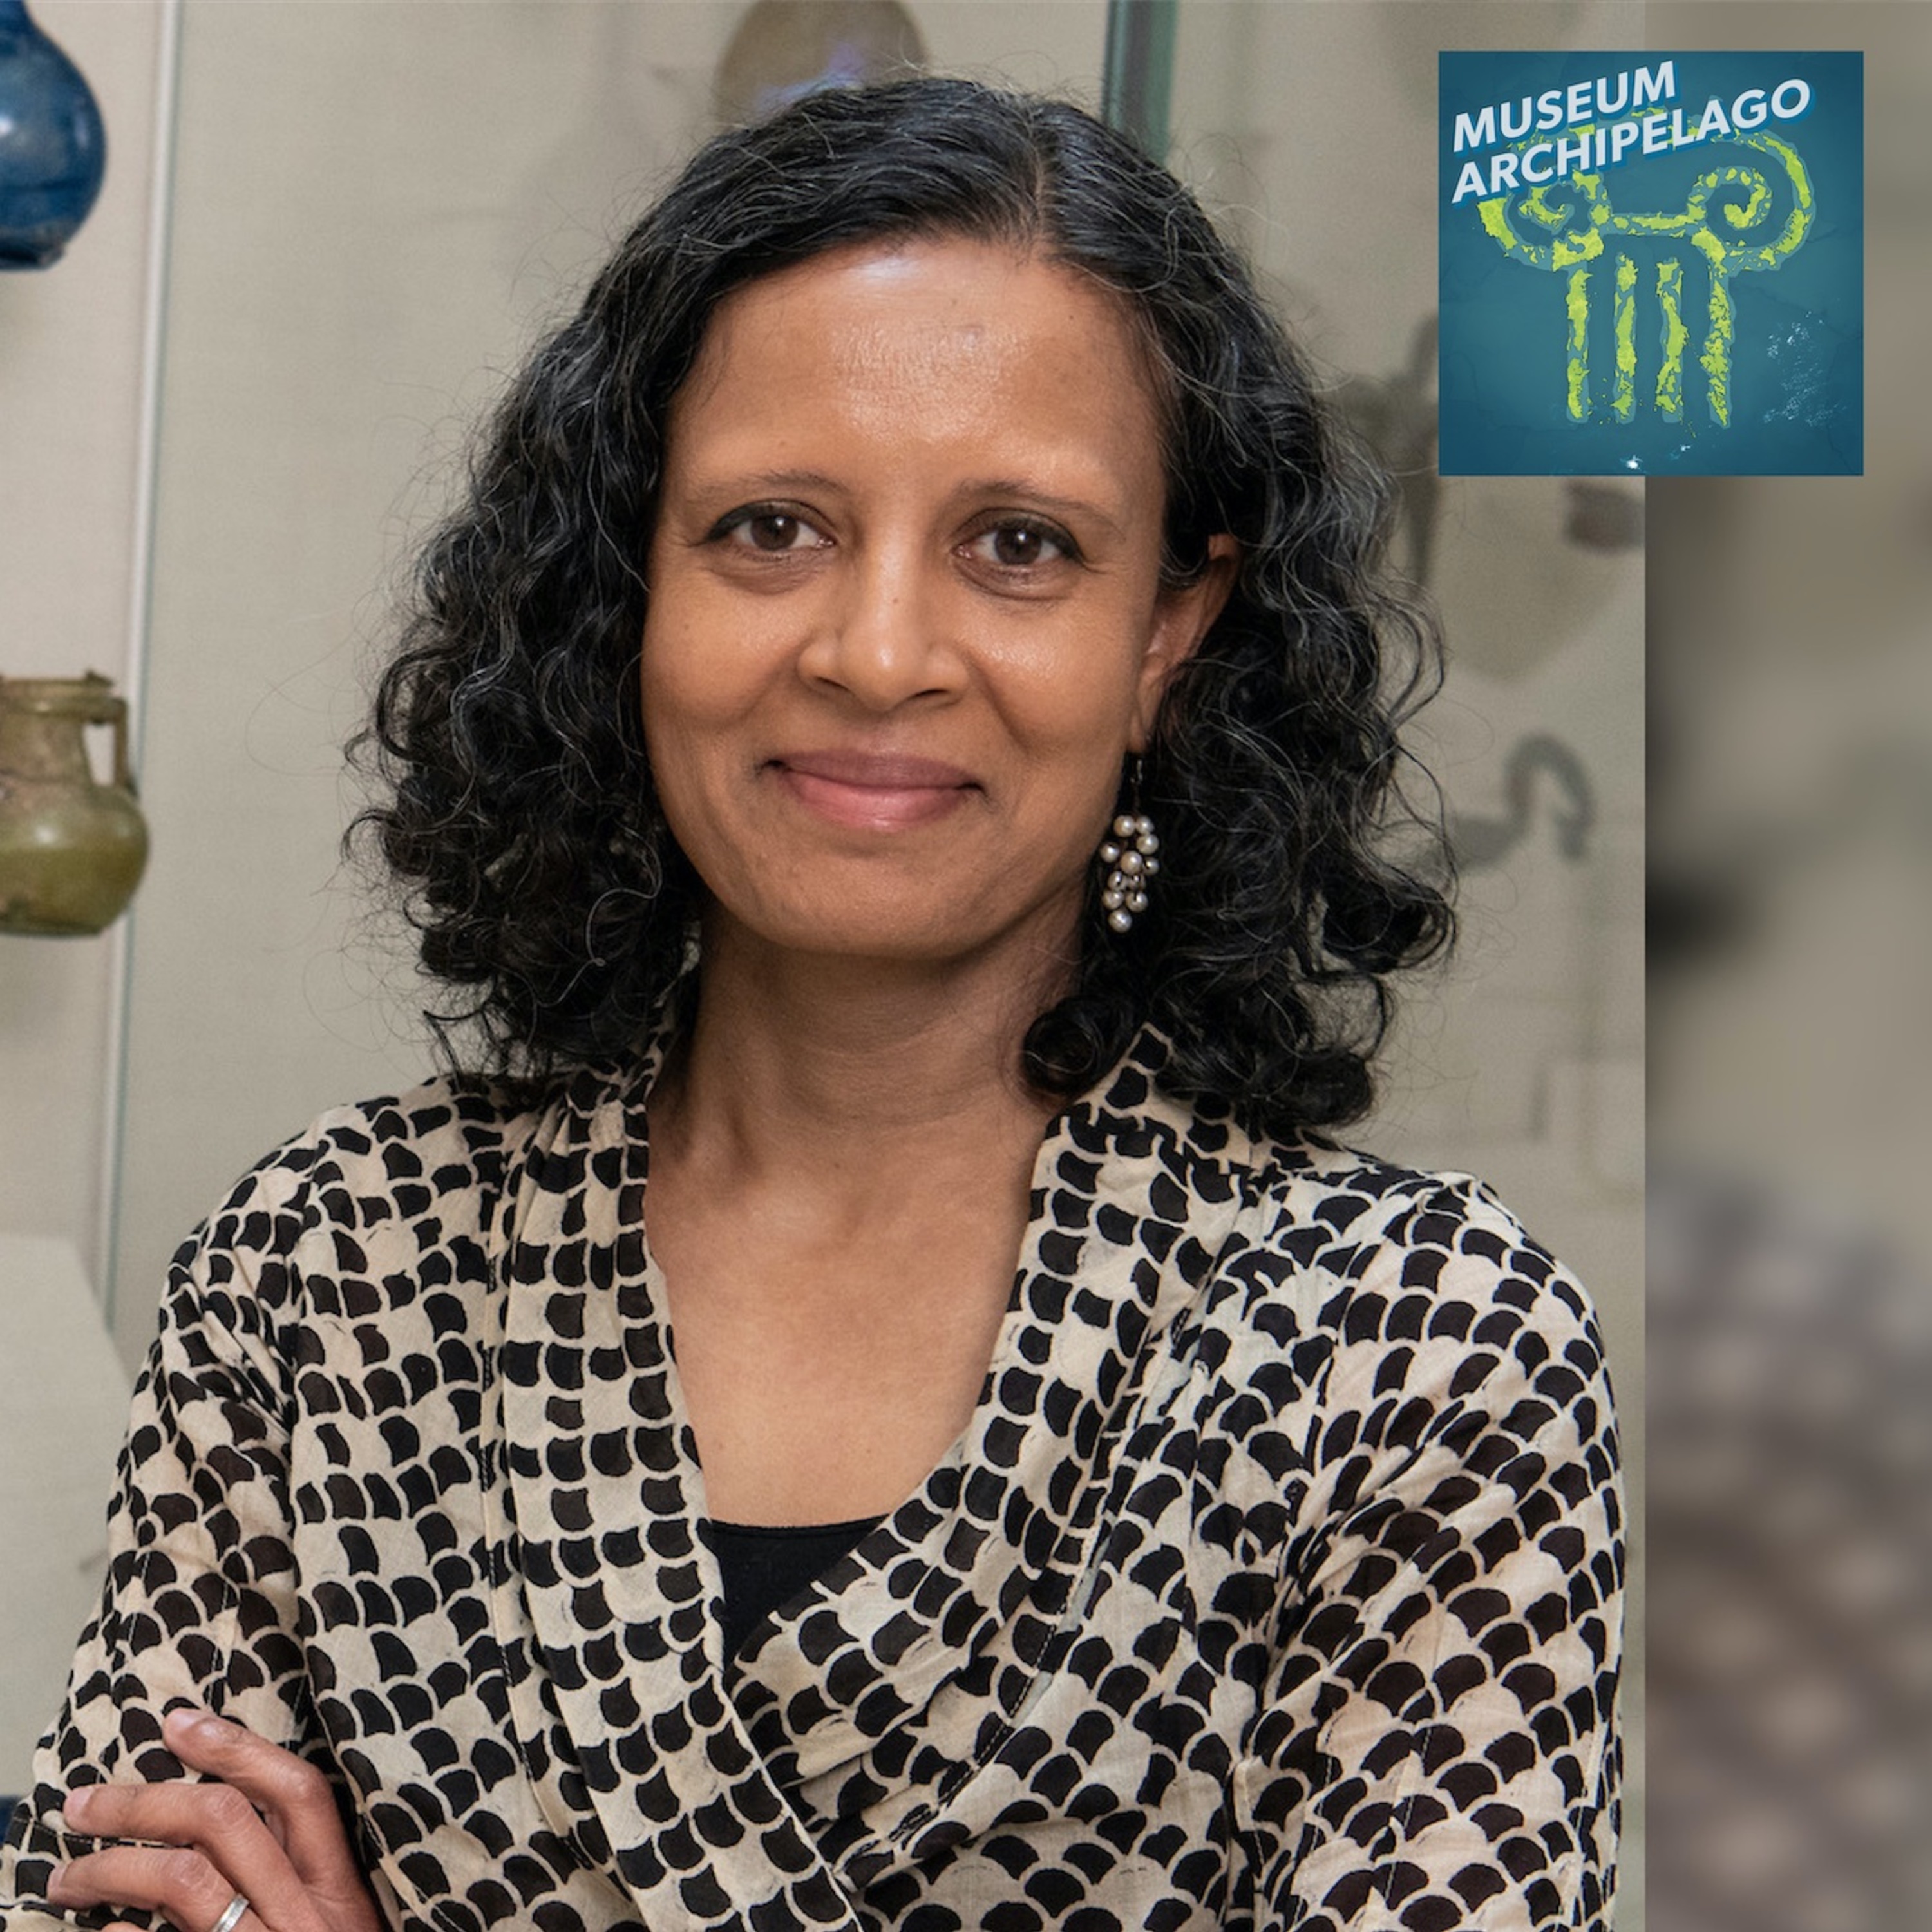 73. Sanchita Balachandran Shifts the Framework for Conservation with Untold Stories